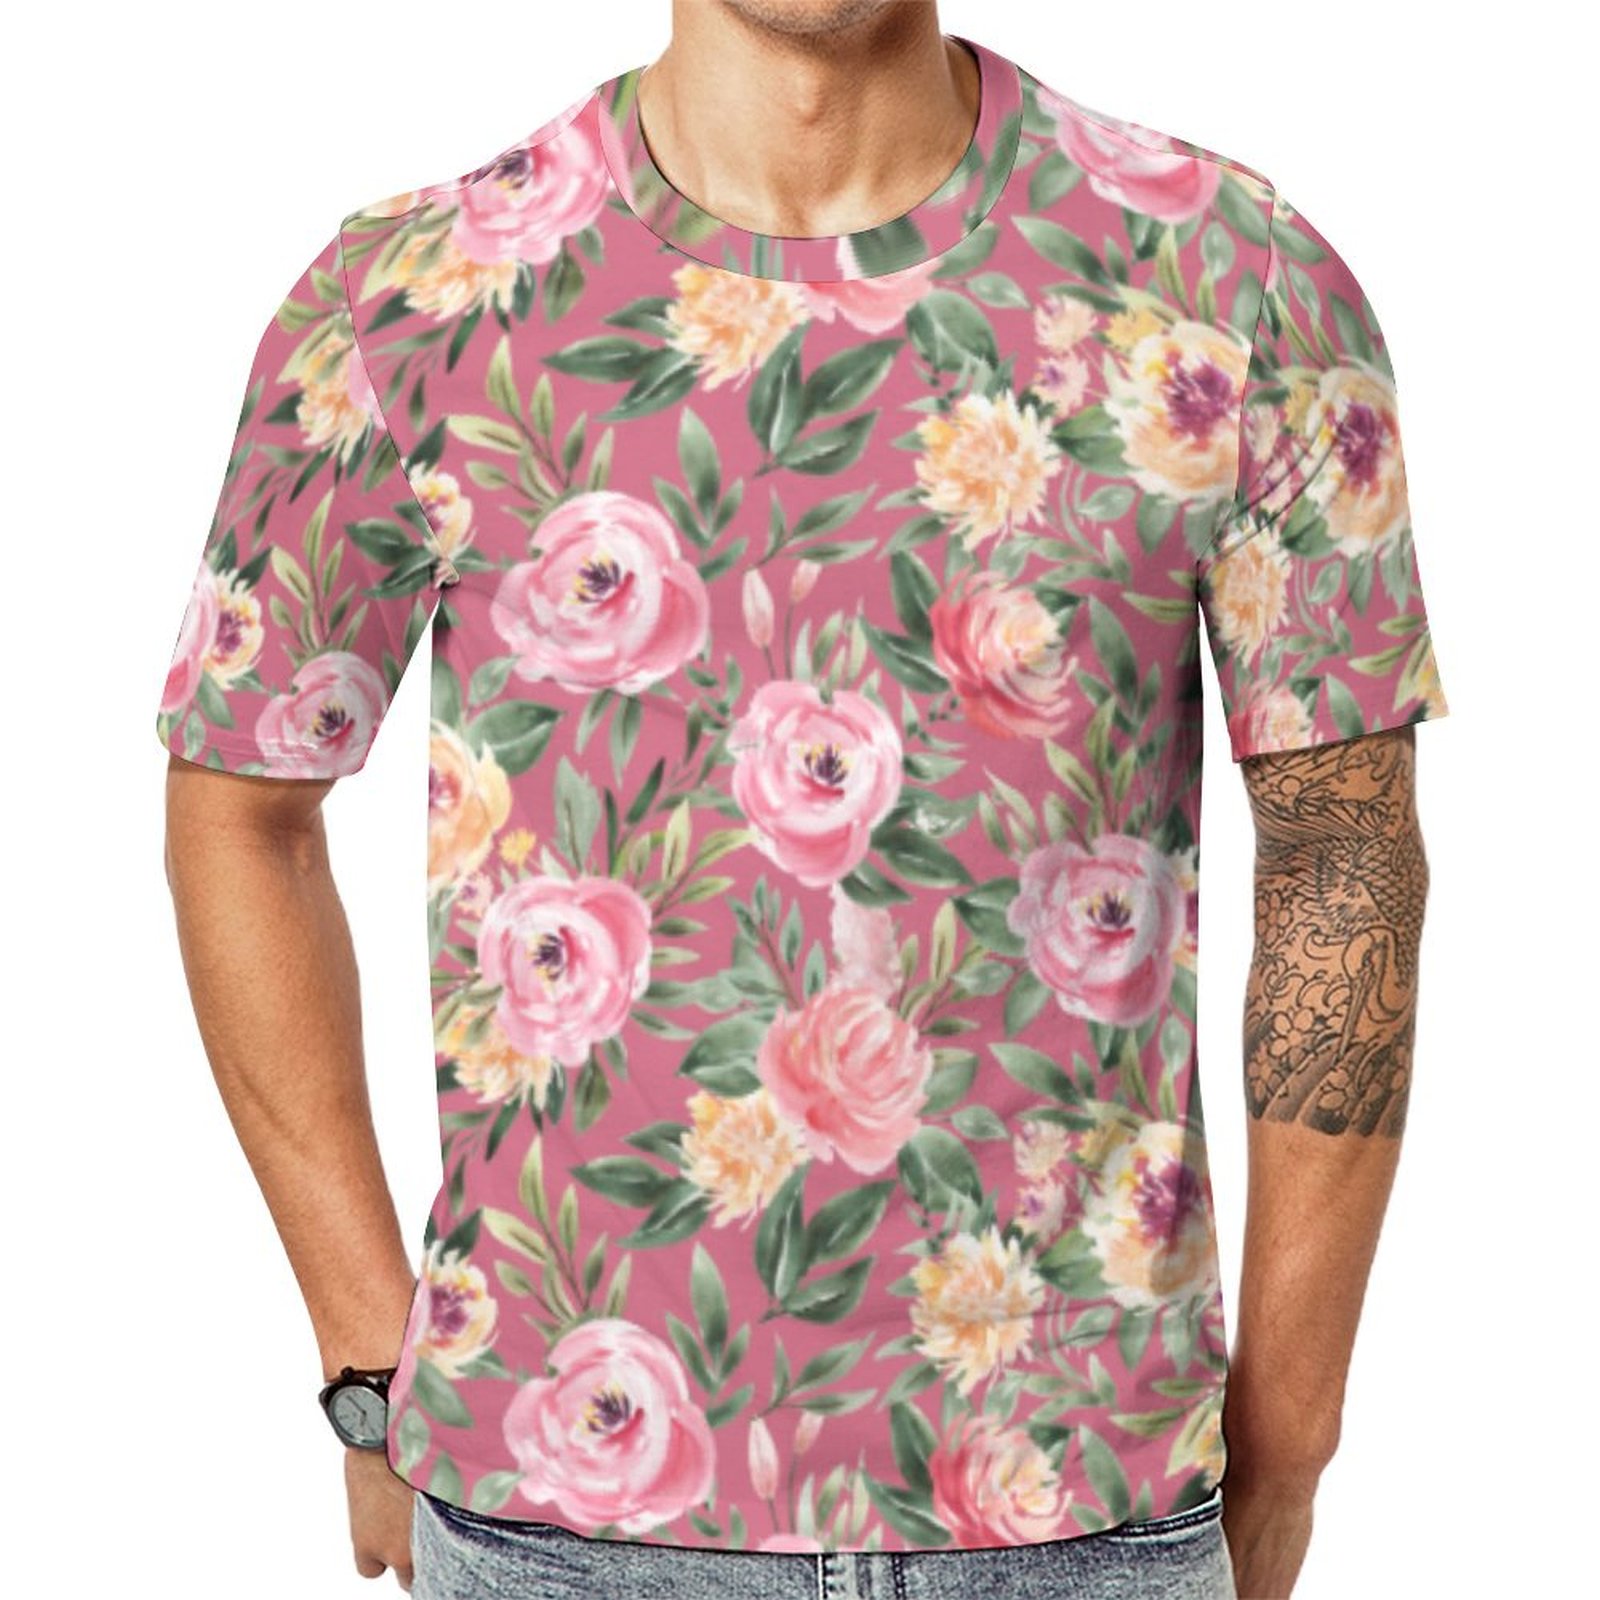 Mauve And Golden Peonies Country Garden Floral Short Sleeve Print Unisex Tshirt Summer Casual Tees for Men and Women Coolcoshirts